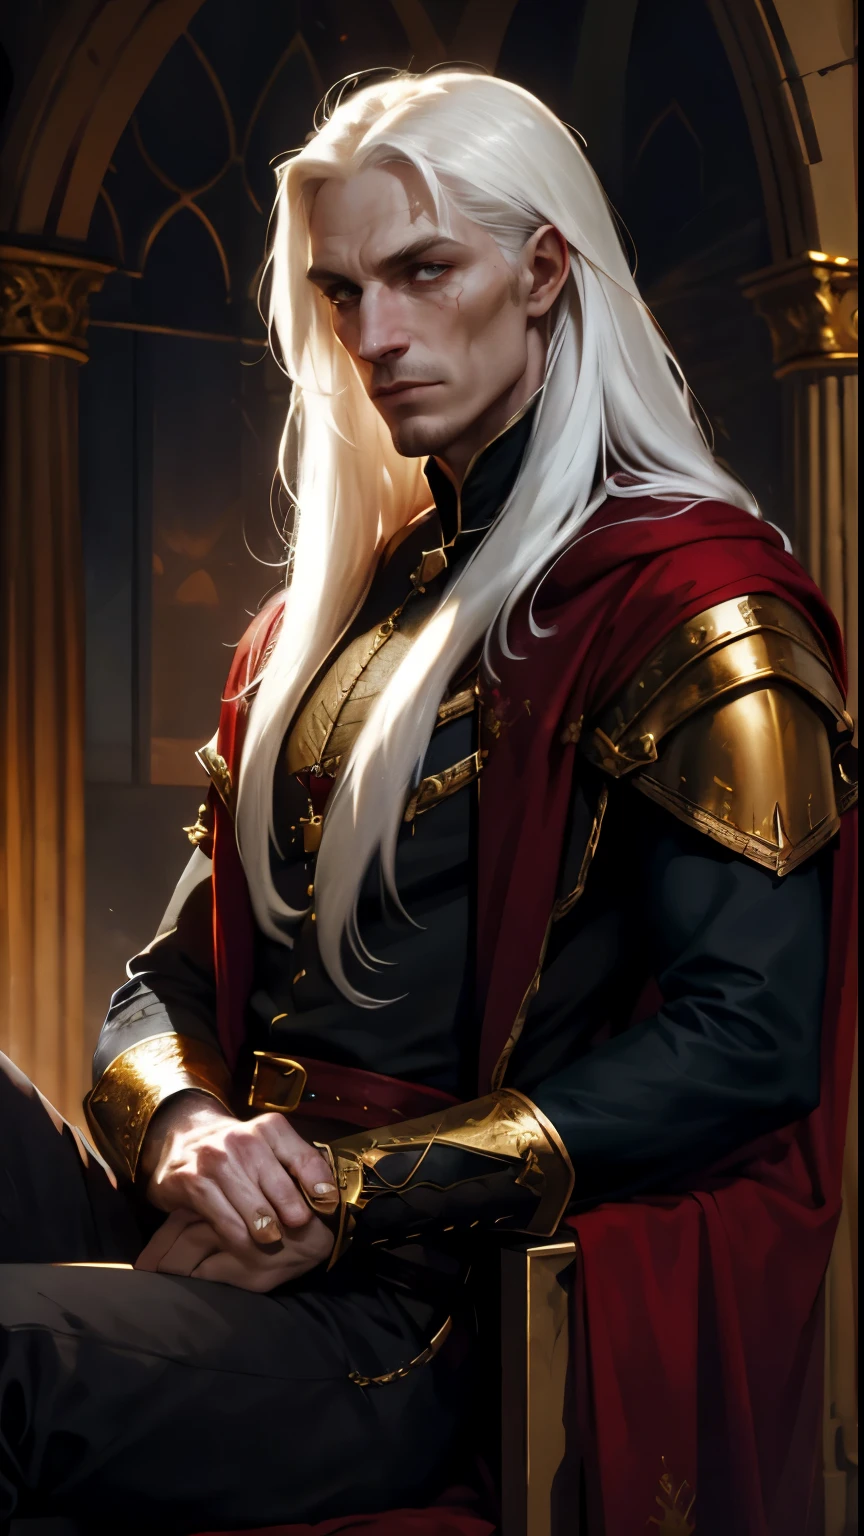 Dark fantasy, Middle Ages, Targaryen, prince, man, with long straight white hair, pale skin, scar on nose, strong build, face similar to Luke Goss, in a red doublet with gold buckles, imperious pose, hd